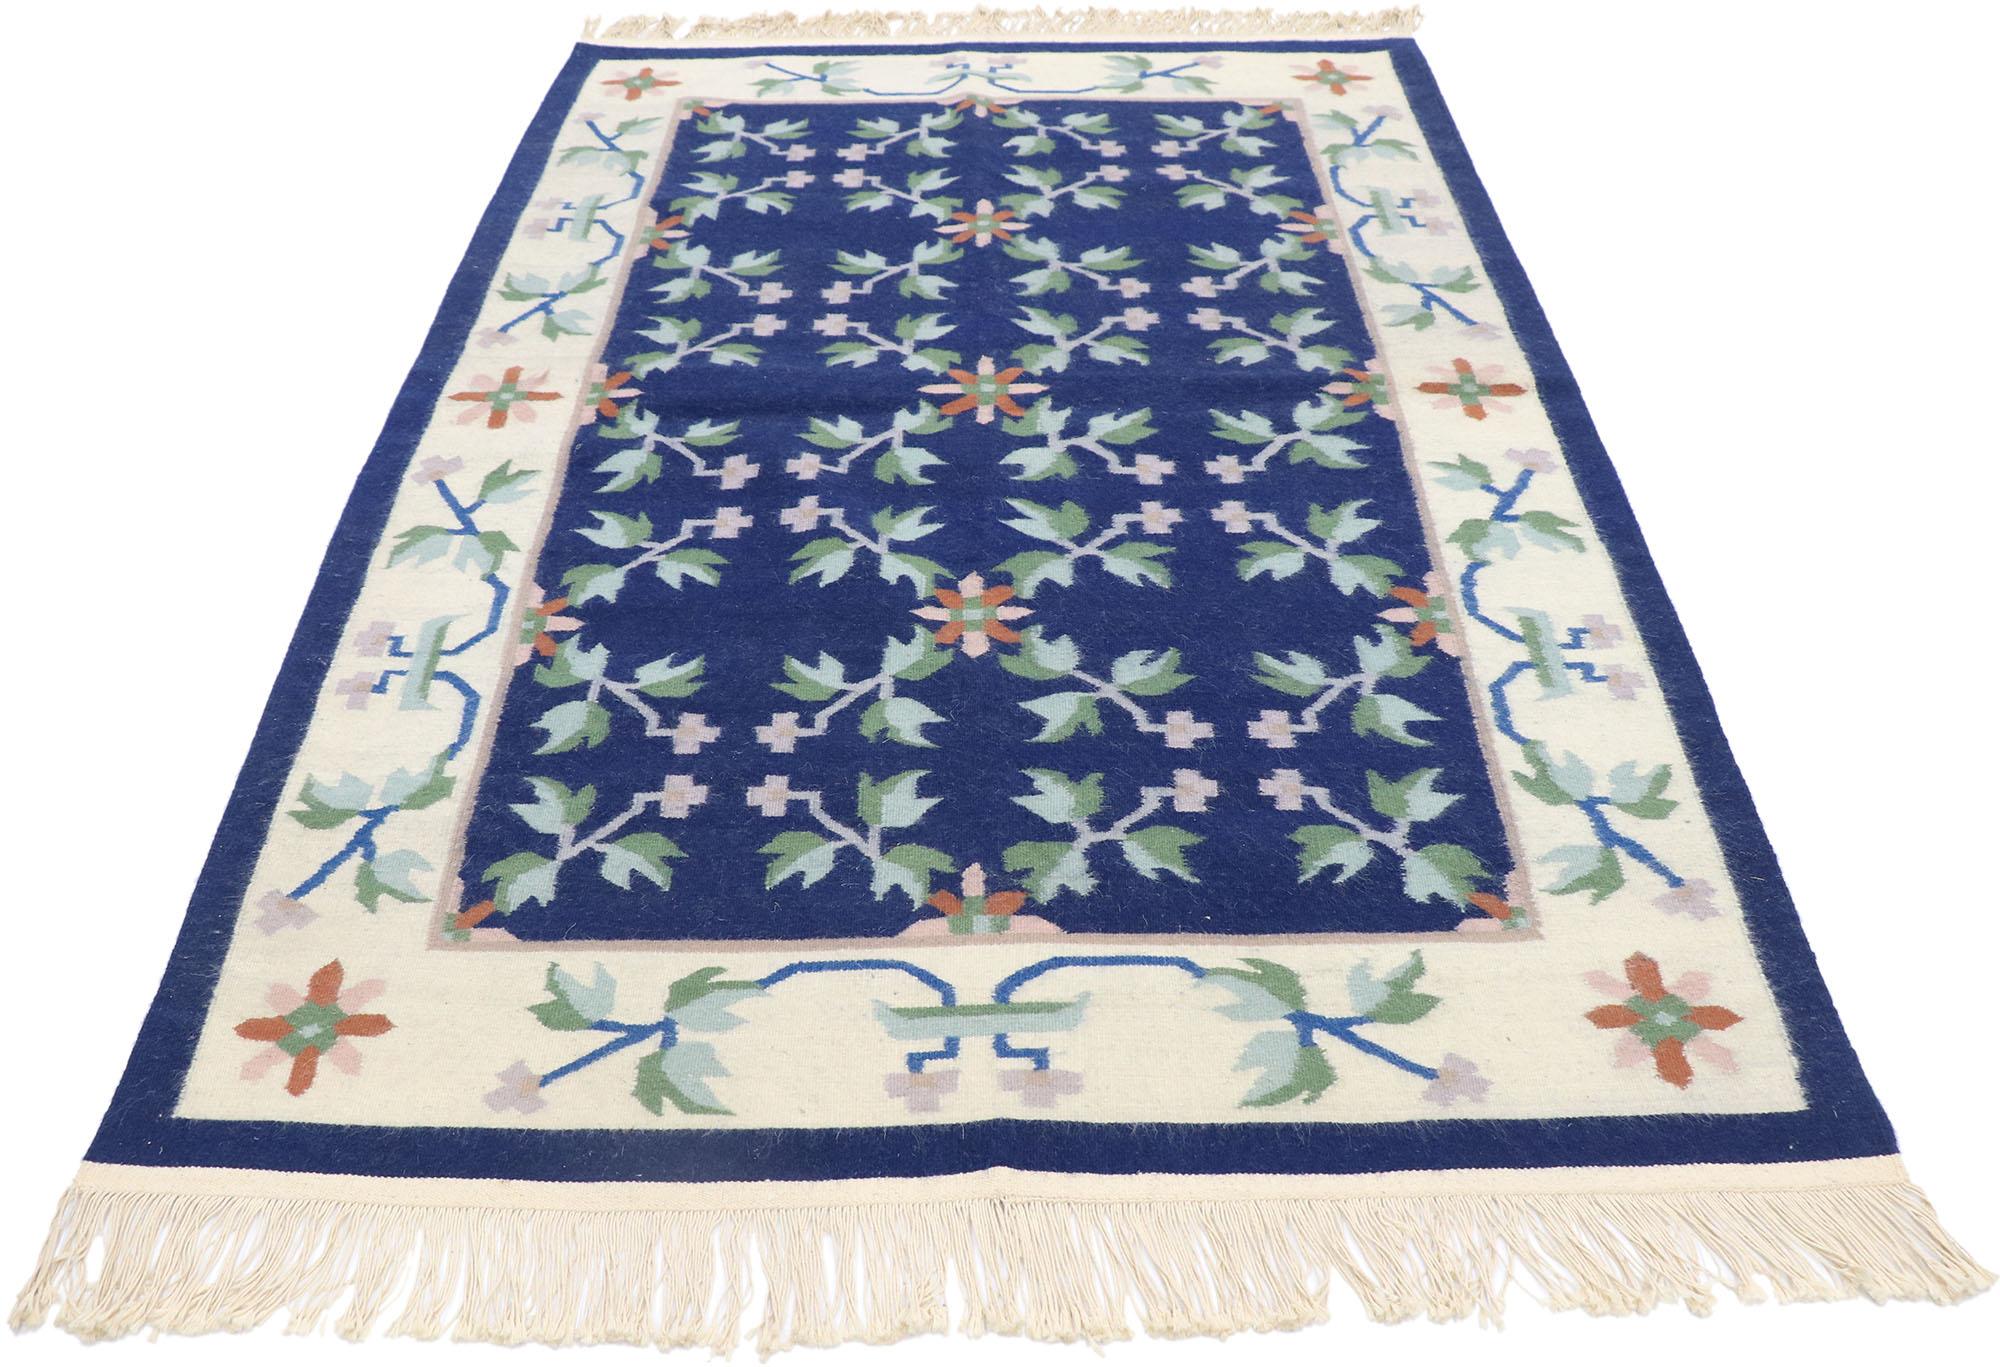 77815 Vintage Floral Kilim Rug with English Chintz Style 04'01 x 06'03. Delicately feminine and beautifully traditional, this hand-woven wool vintage floral kilim rug is poised to impress. The blue abrashed field features an all-over botanical